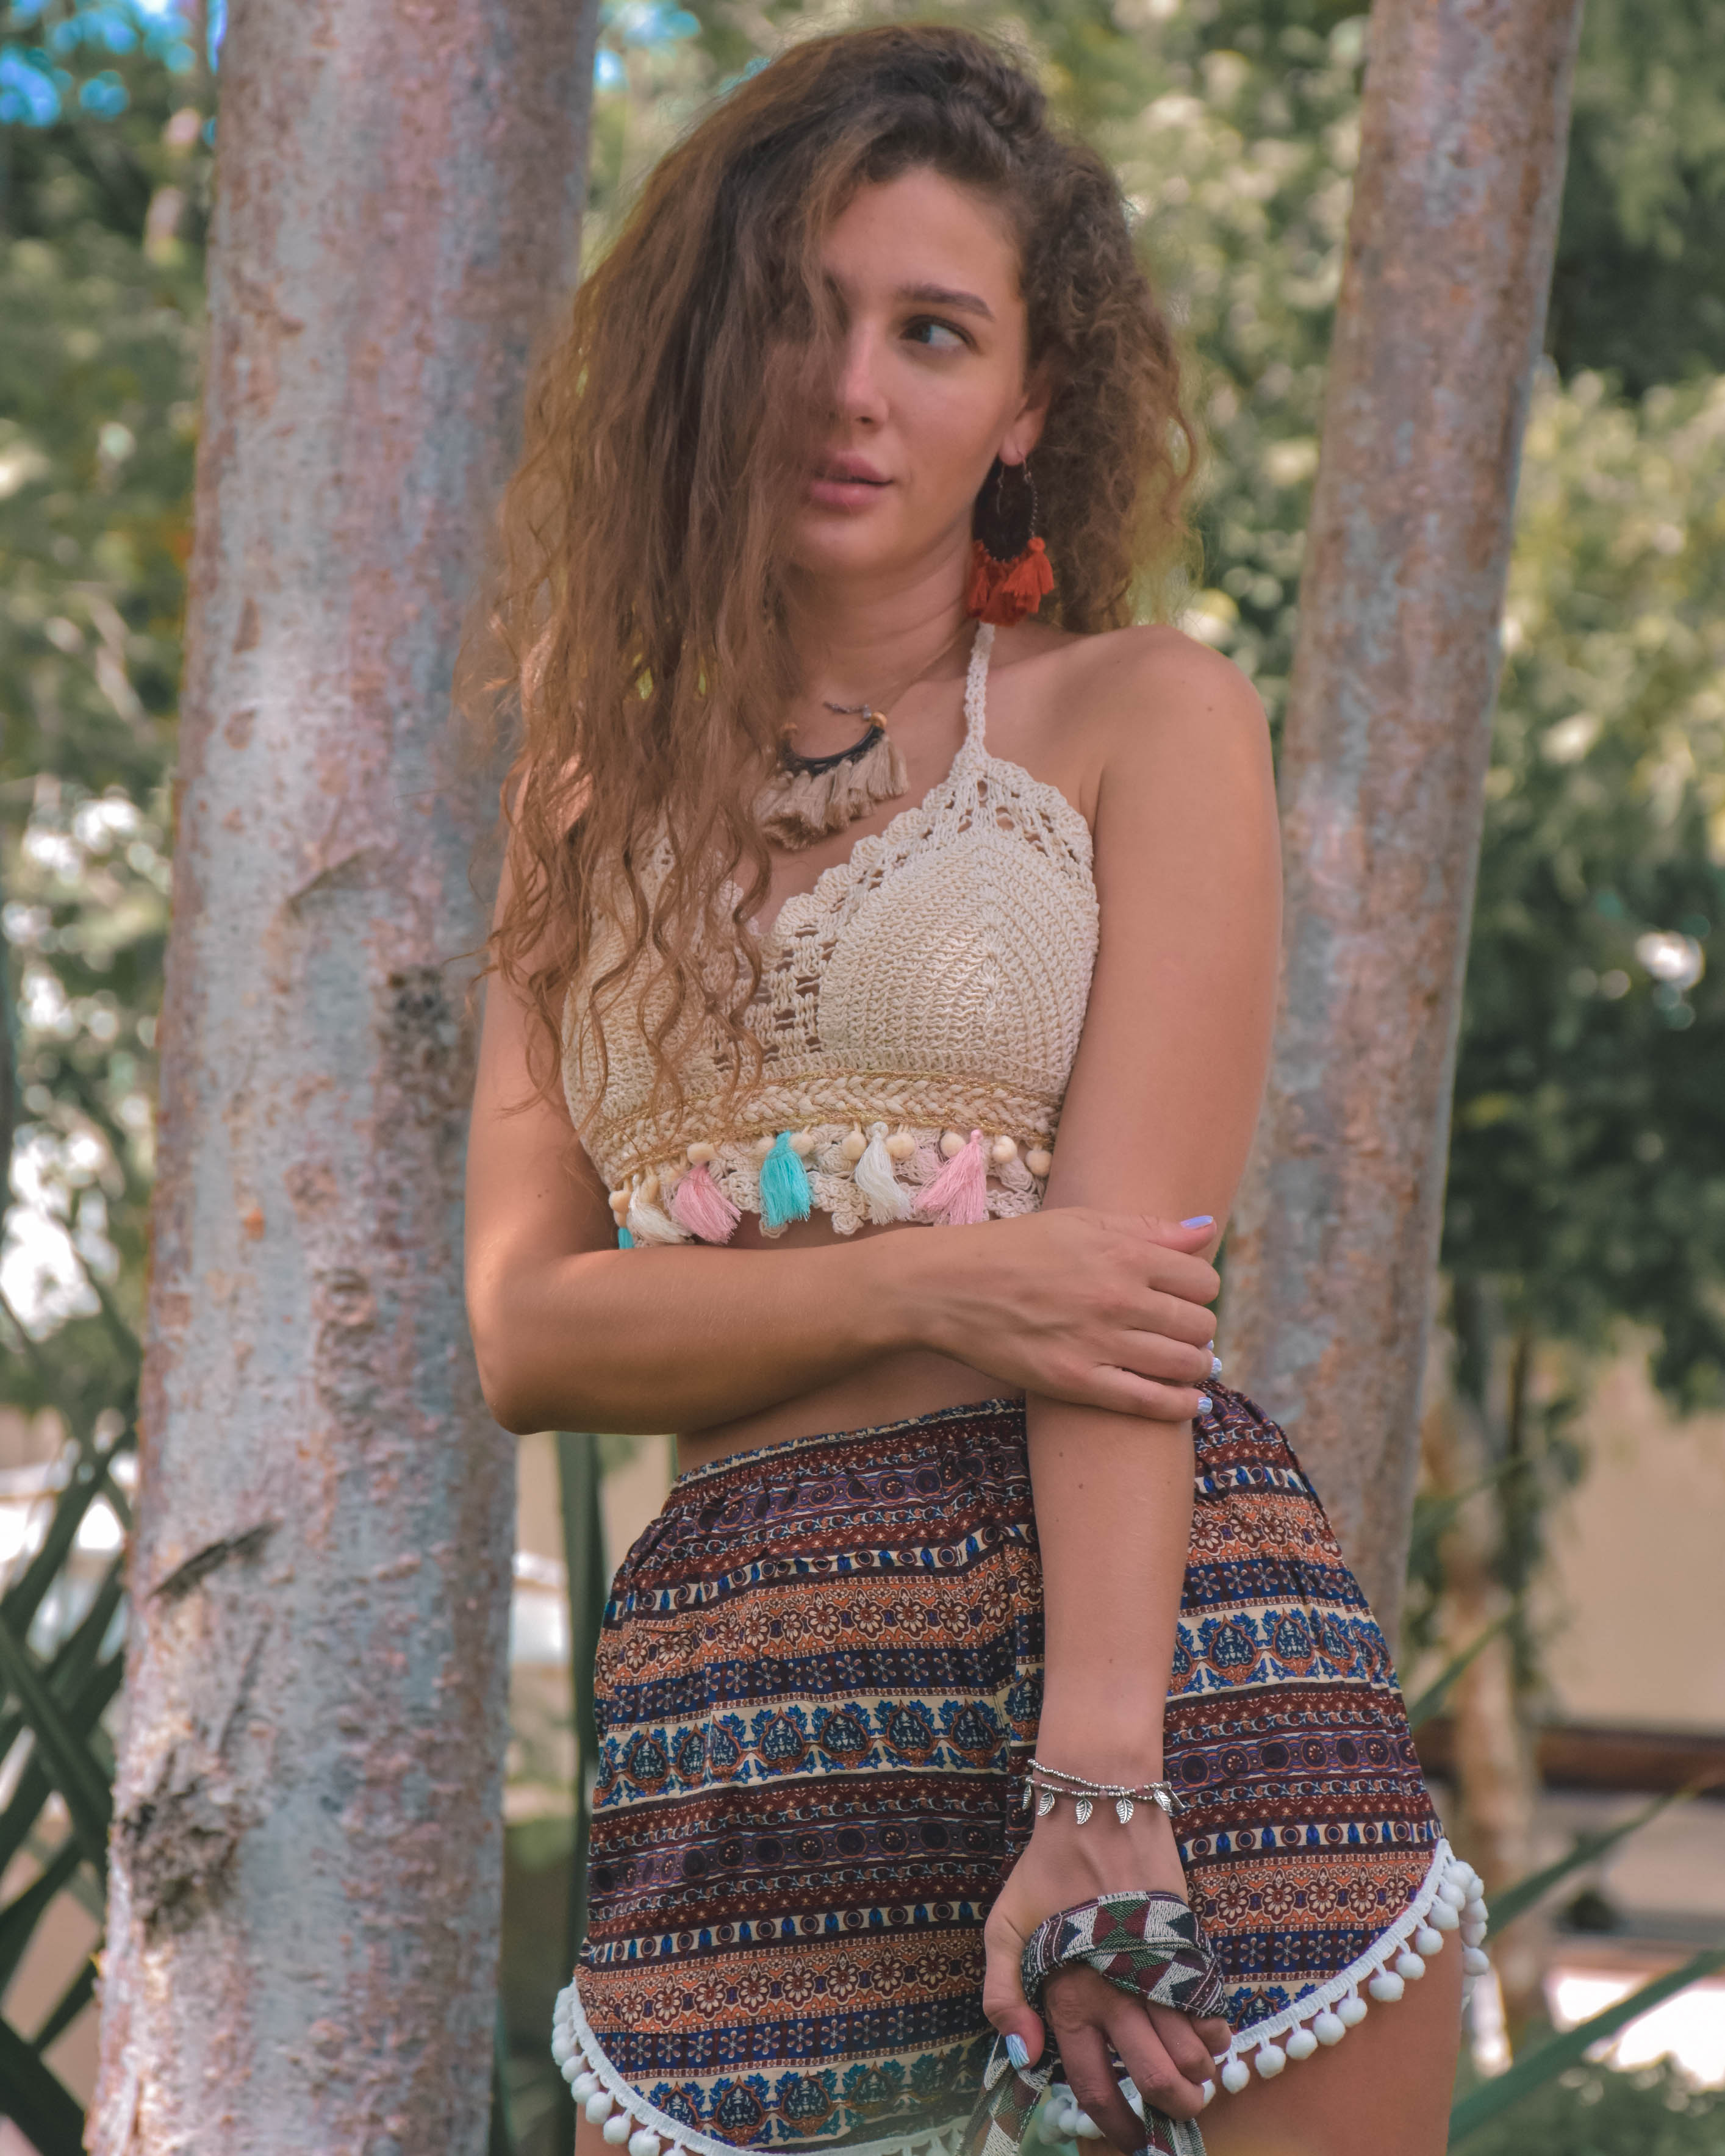 CAIRO EARRINGS Elepanta Earrings - Buy Today Elephant Pants Jewelry And Bohemian Clothes Handmade In Thailand Help To Save The Elephants FairTrade And Vegan